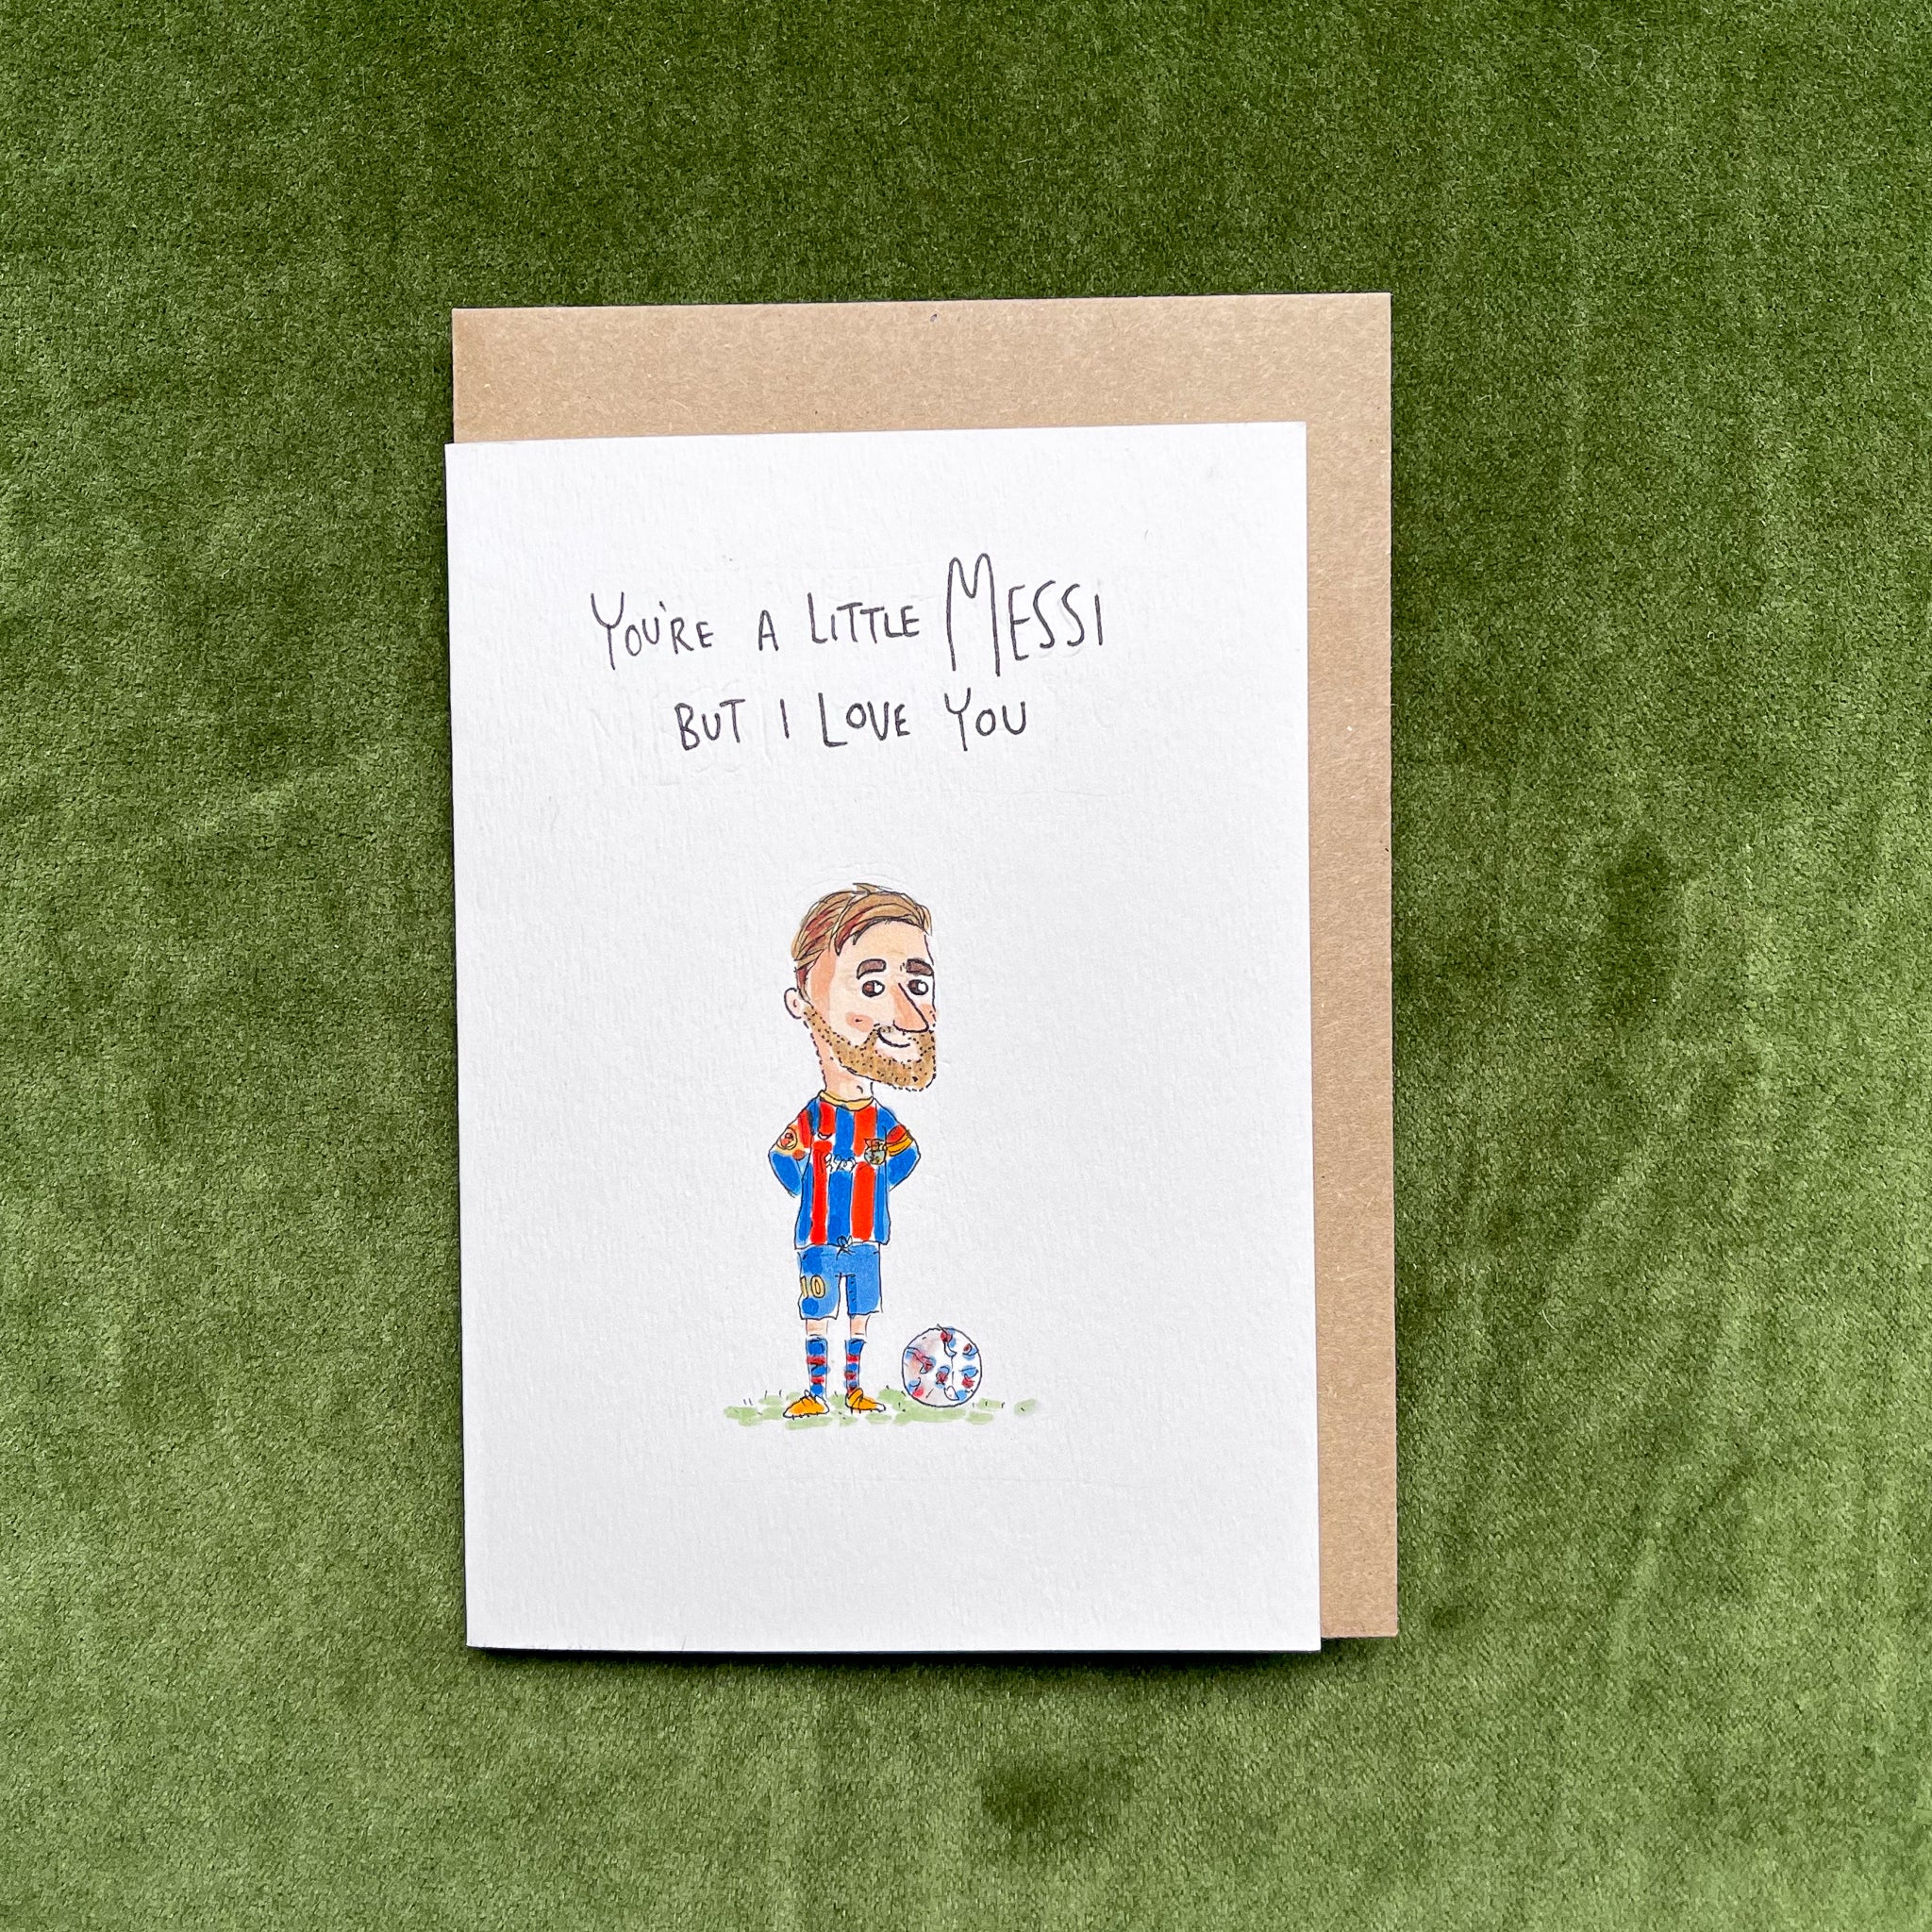 You're a Little Messi but I Love You - Well Drawn